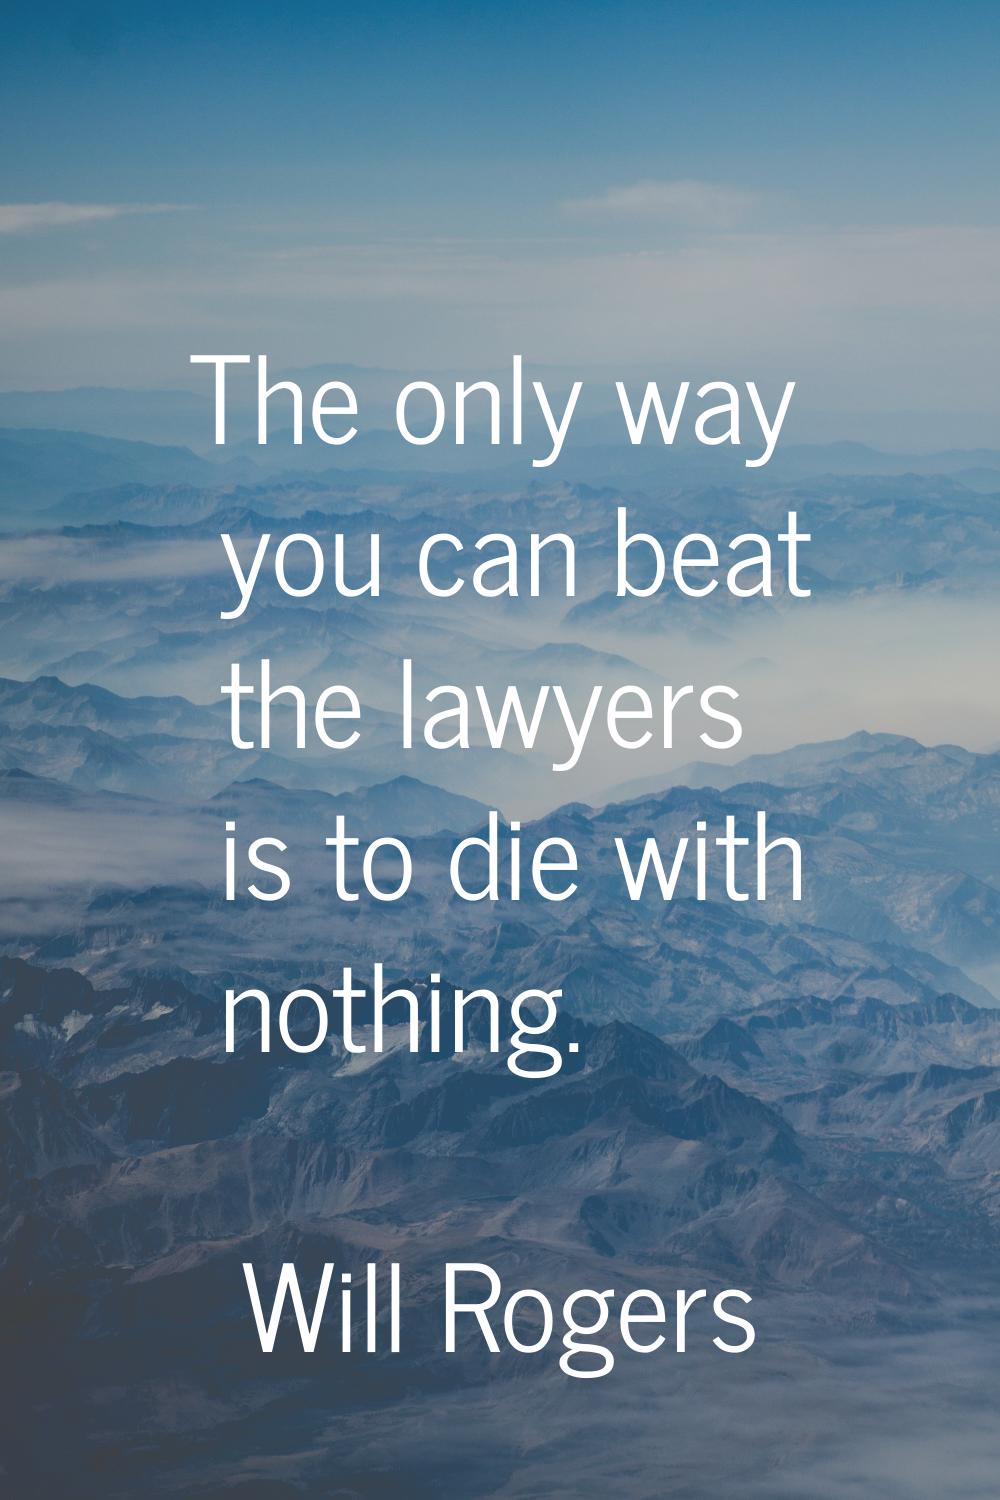 The only way you can beat the lawyers is to die with nothing.